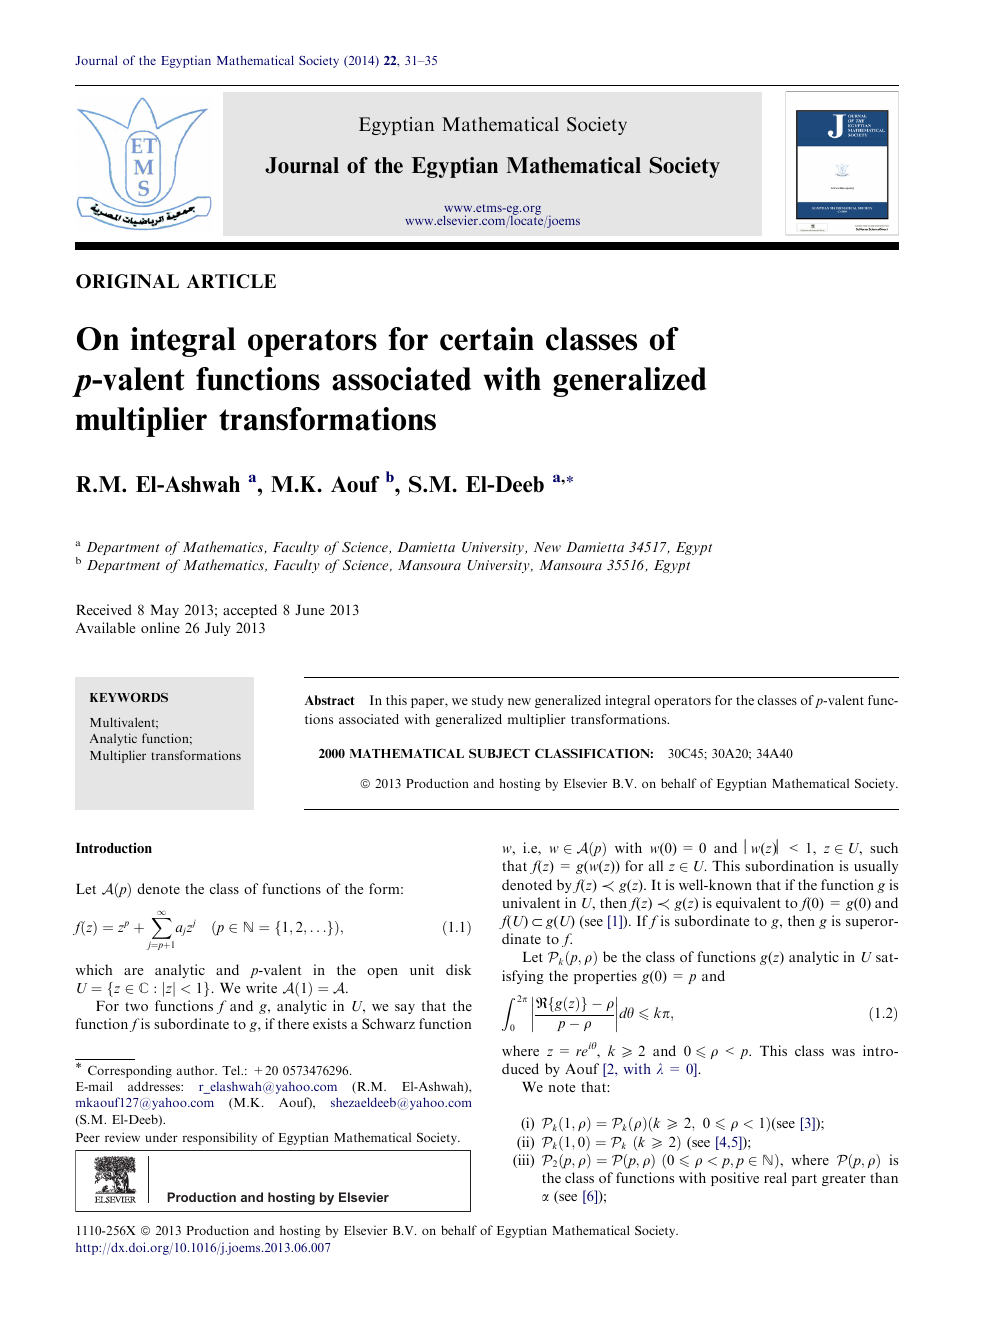 On Integral Operators For Certain Classes Of P Valent Functions Associated With Generalized Multiplier Transformations Topic Of Research Paper In Mathematics Download Scholarly Article Pdf And Read For Free On Cyberleninka Open